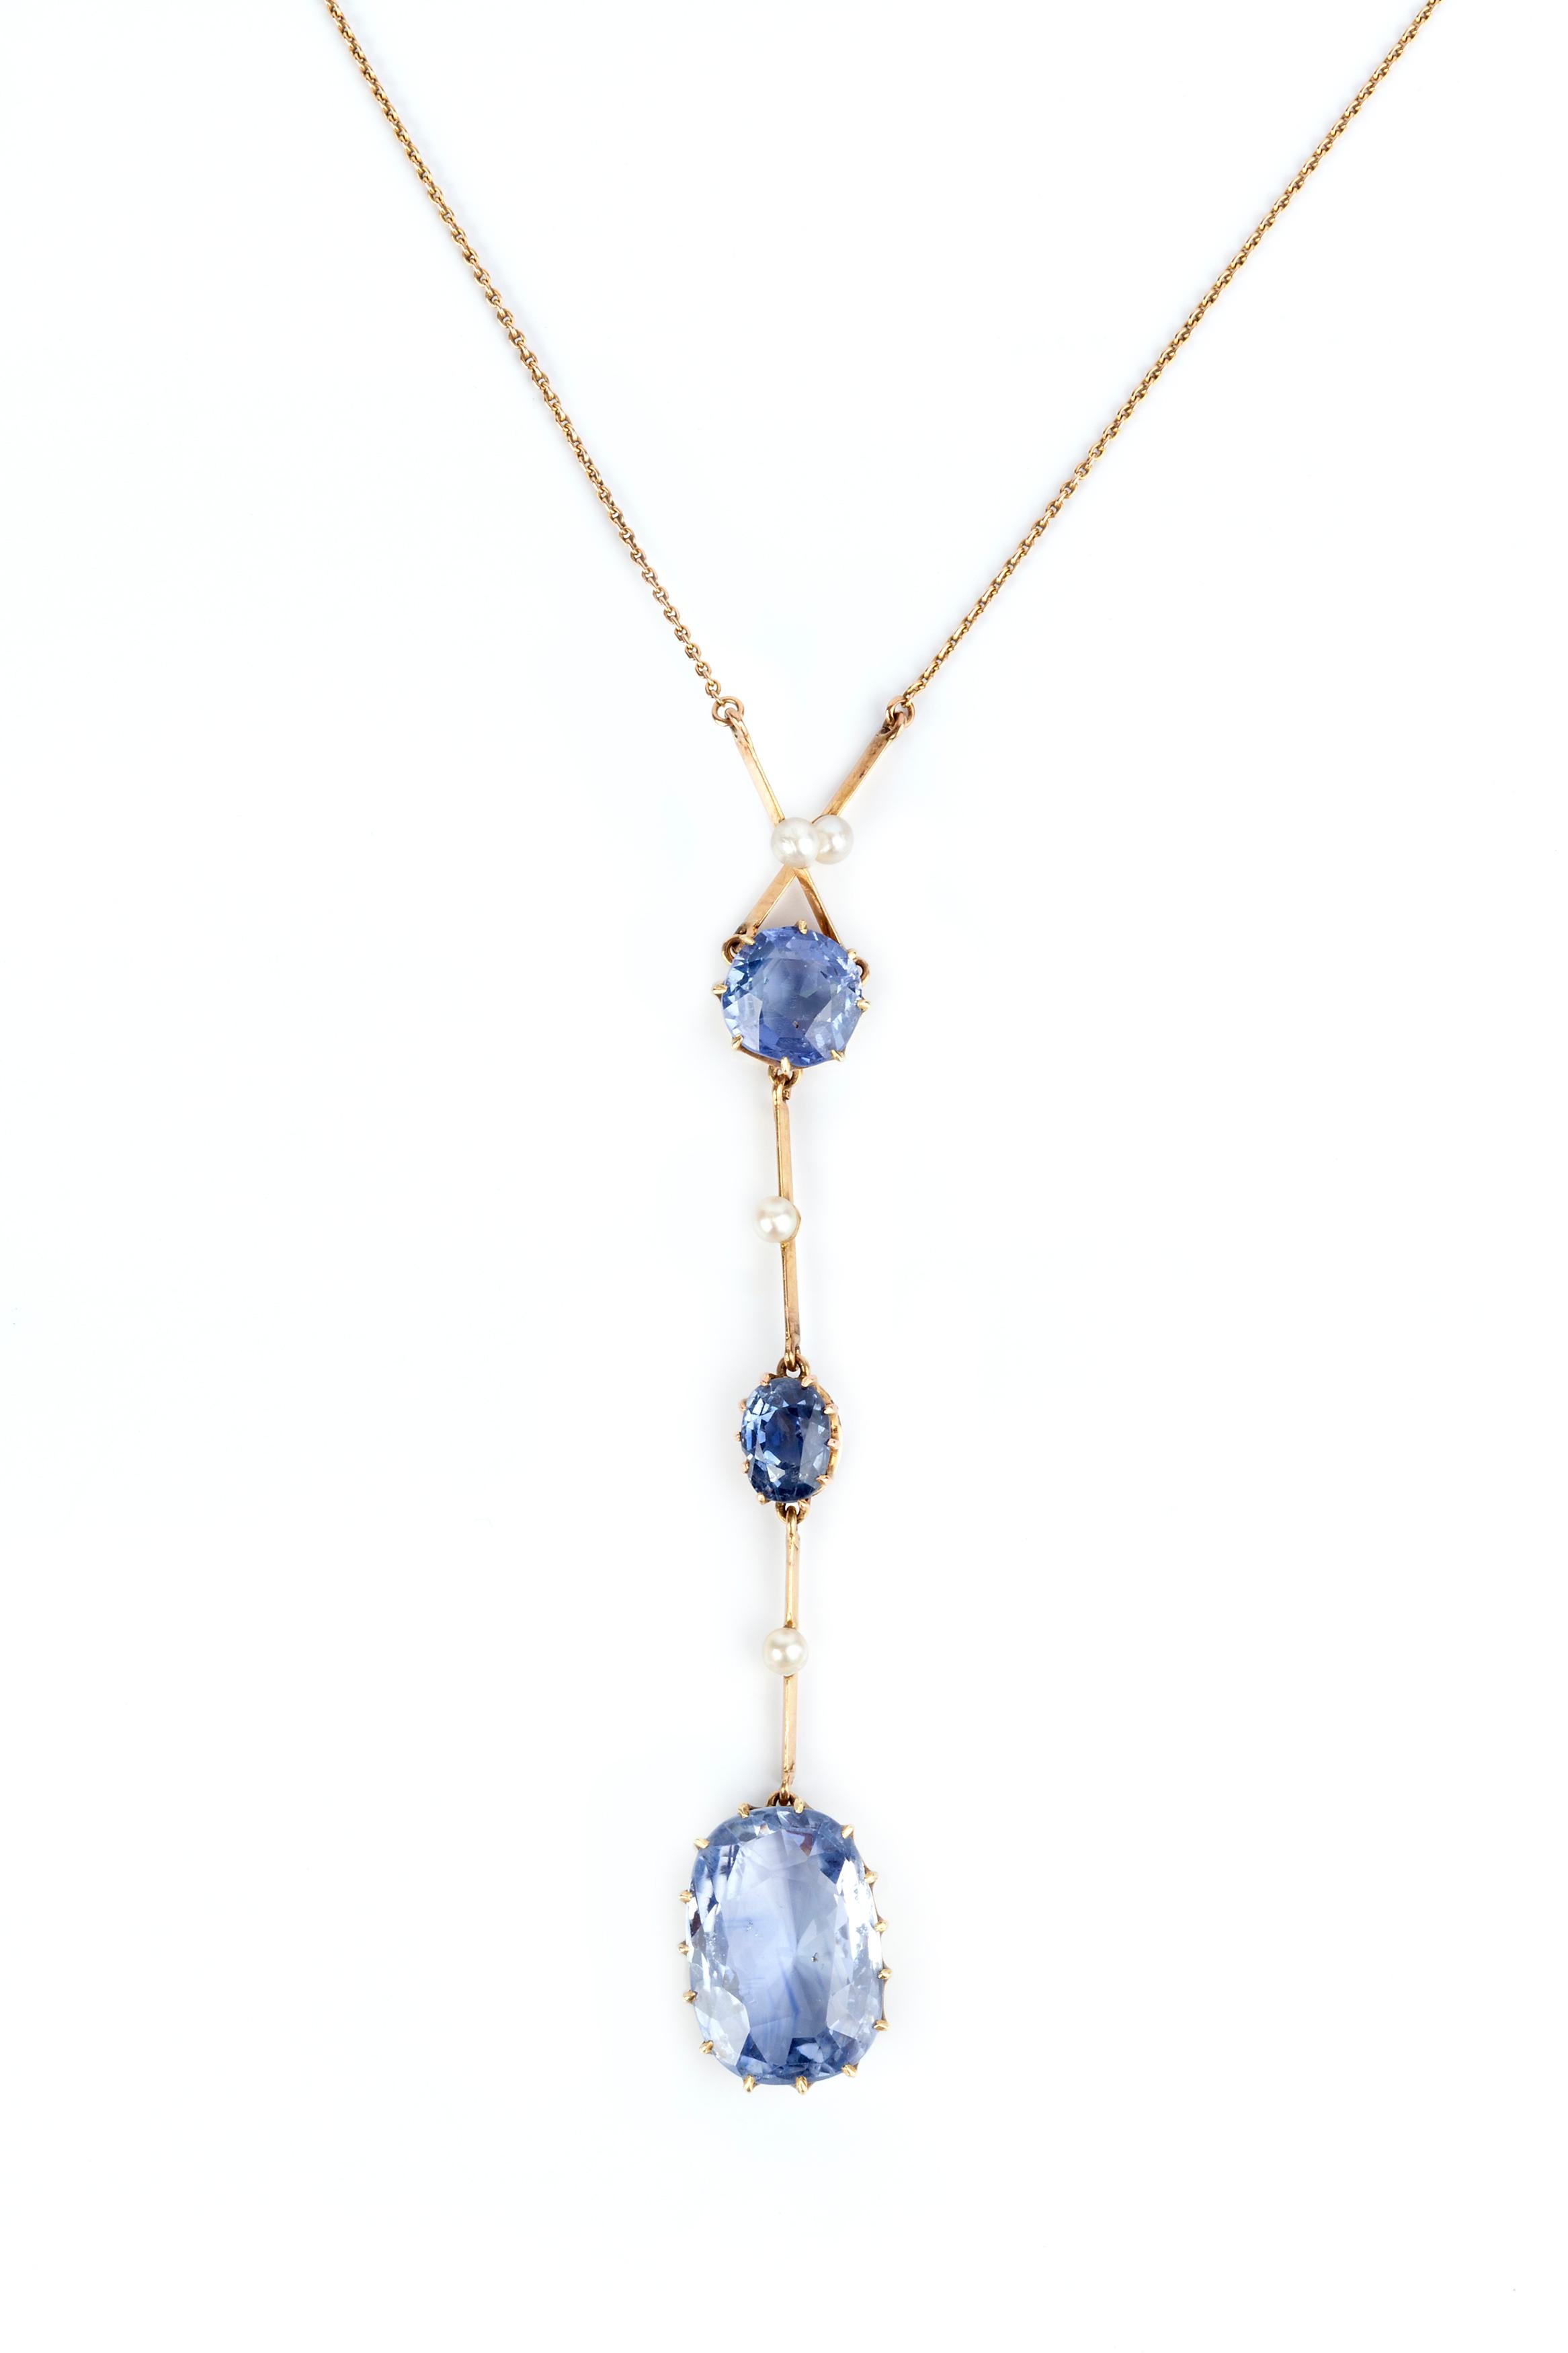 A Ceylon blue natural unheated sapphire pendant set with three natural sapphires and natural seed pearls on an 18 karat gold chain. The largest sapphire is 5.5cts and the circular sapphire is 1.6cts smaller sapphire 0.8cts. 